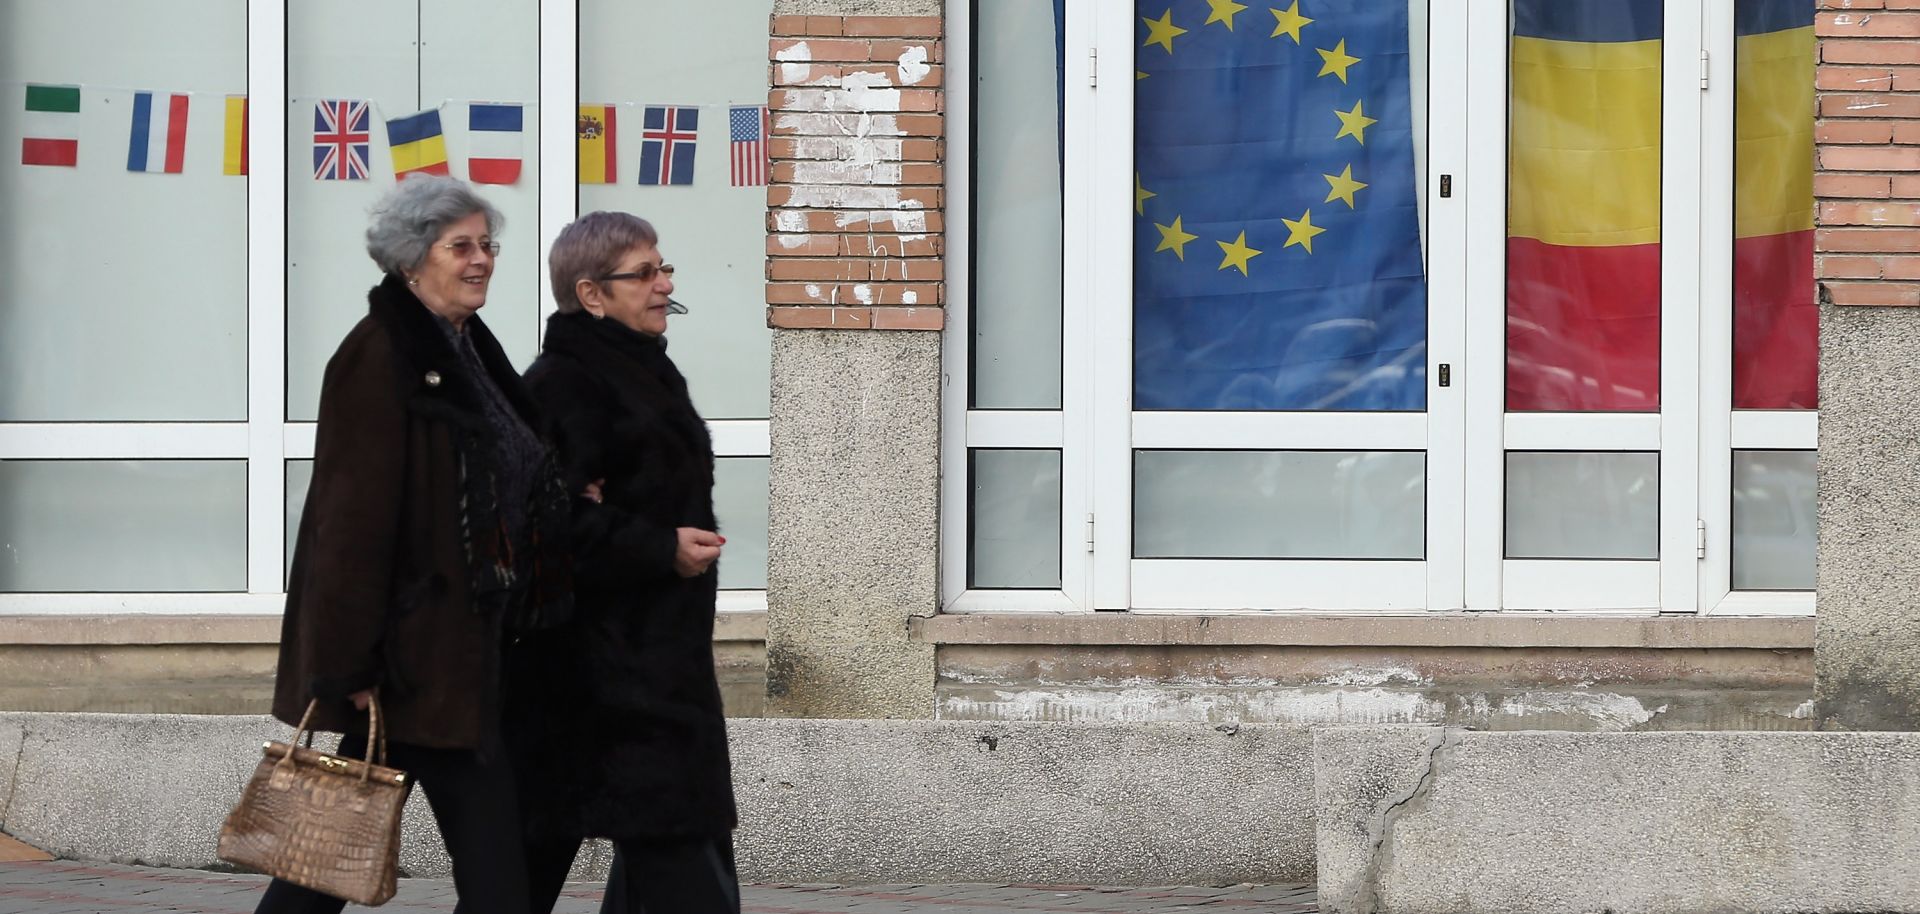 Two elderly women walk past a storefront displaying the European Union and Romanian flags.